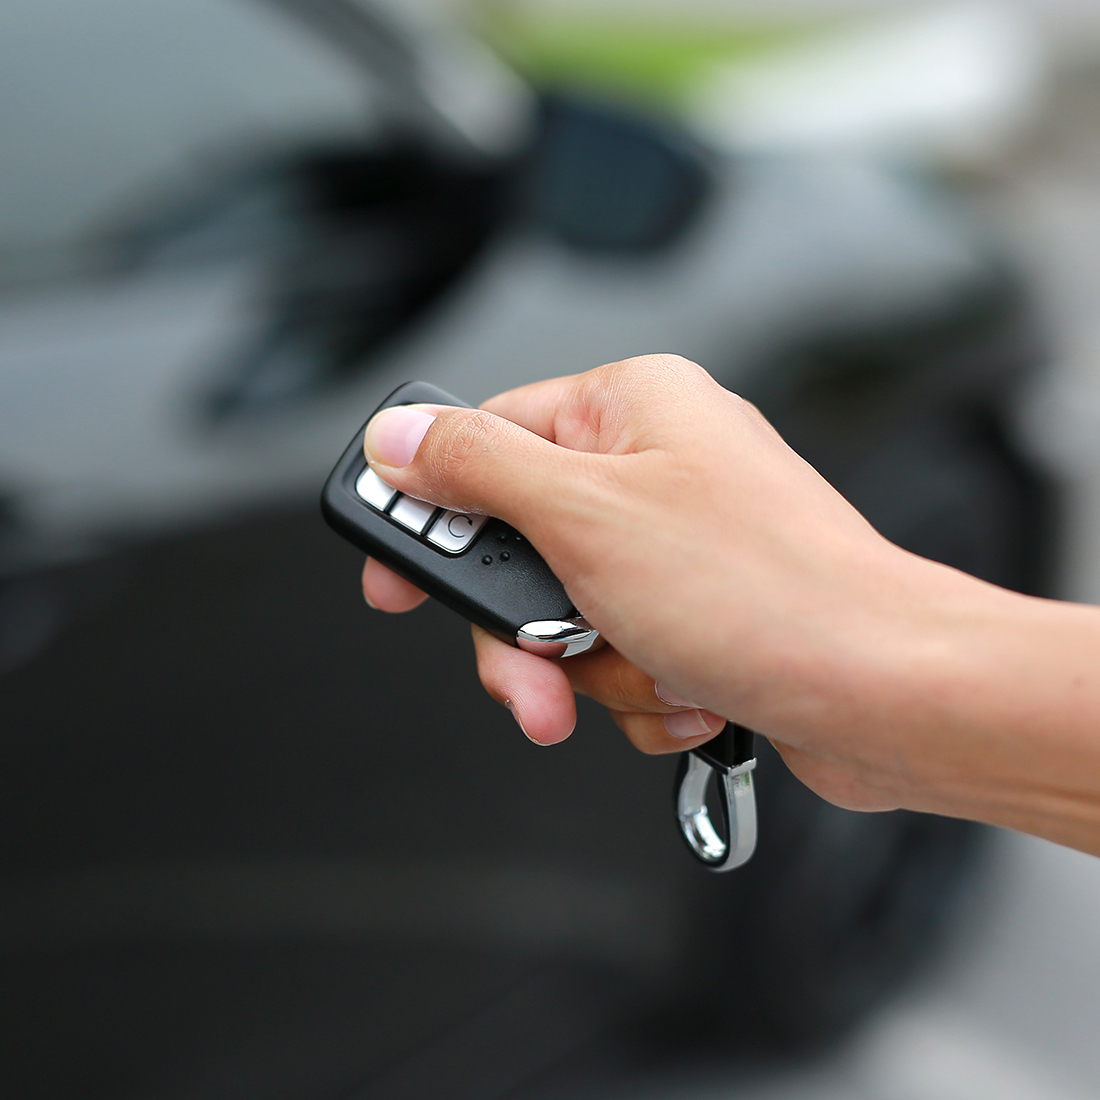 a photo of remote key for car security systems